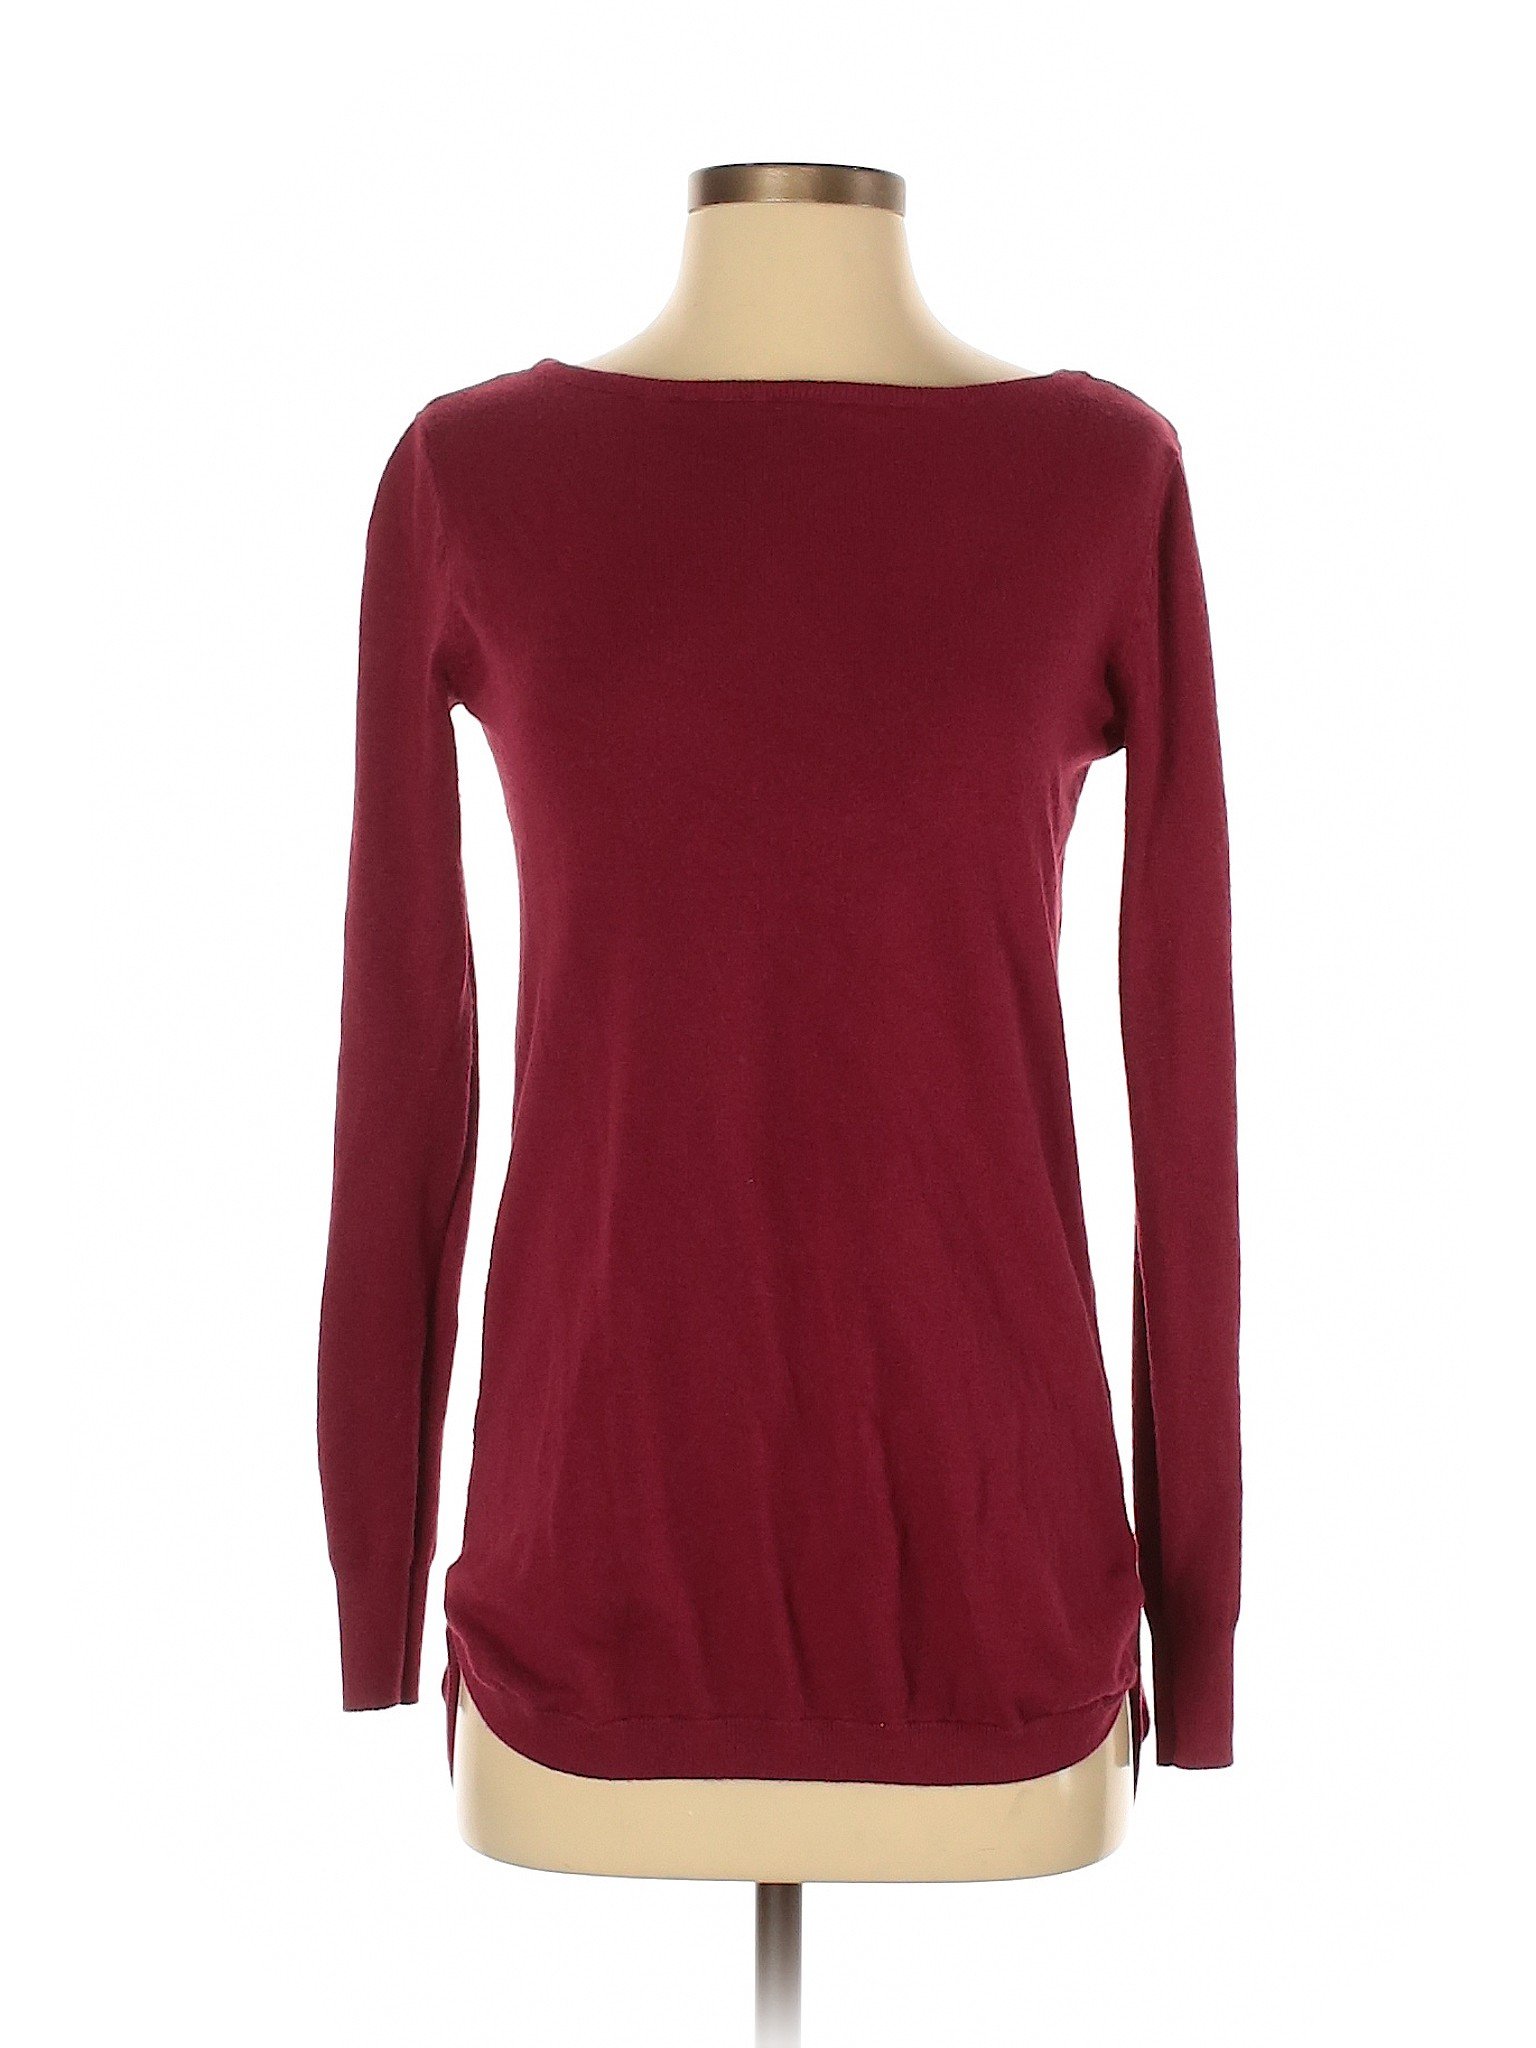 Cyrus Women Red Pullover Sweater S | eBay